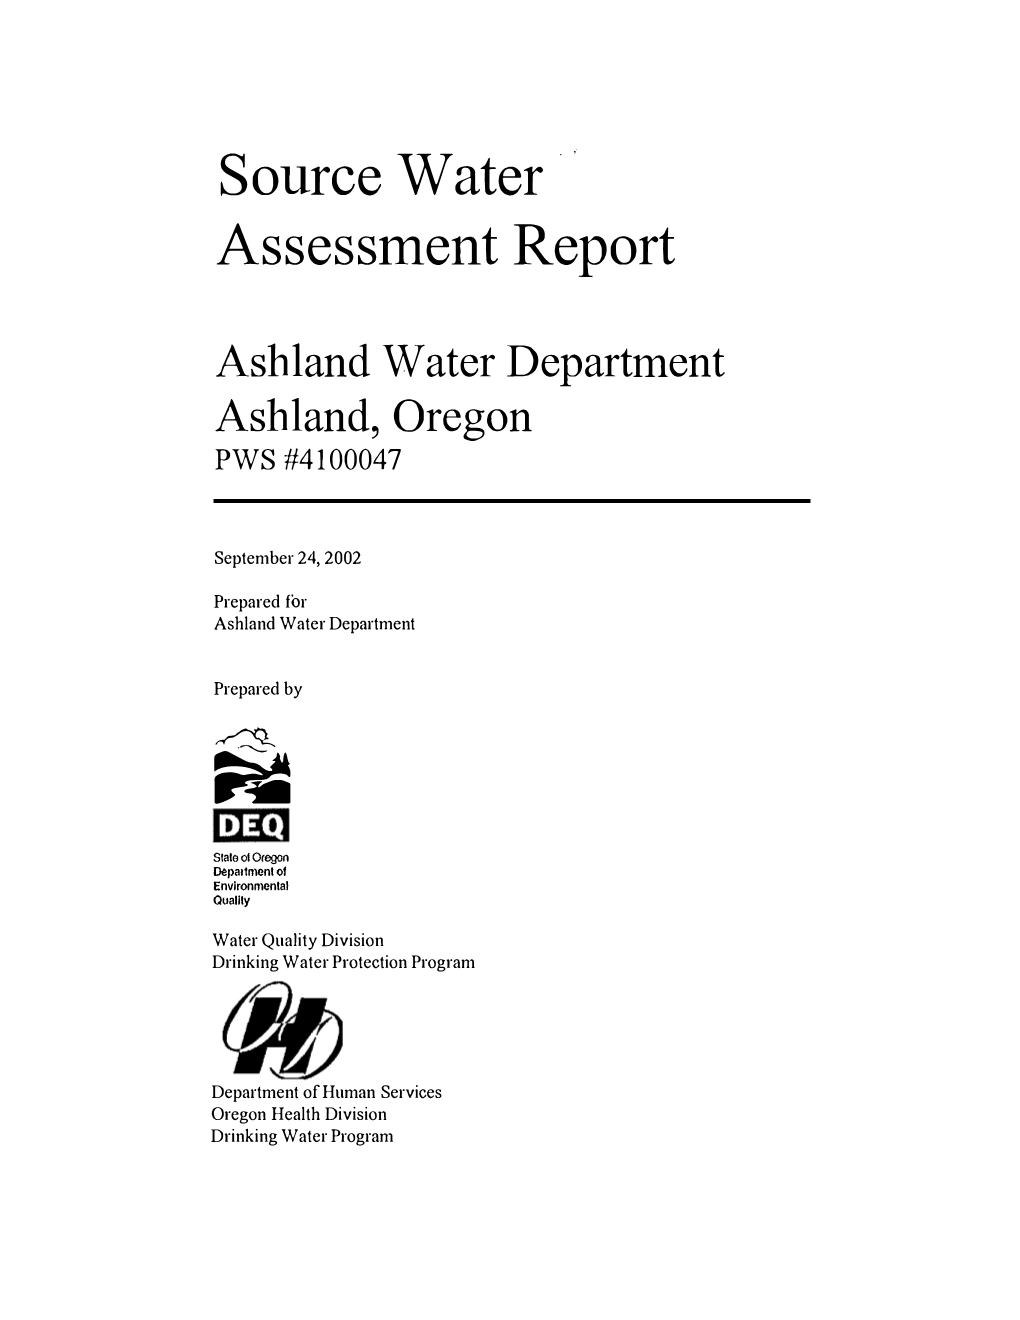 Source Water Assessment Report